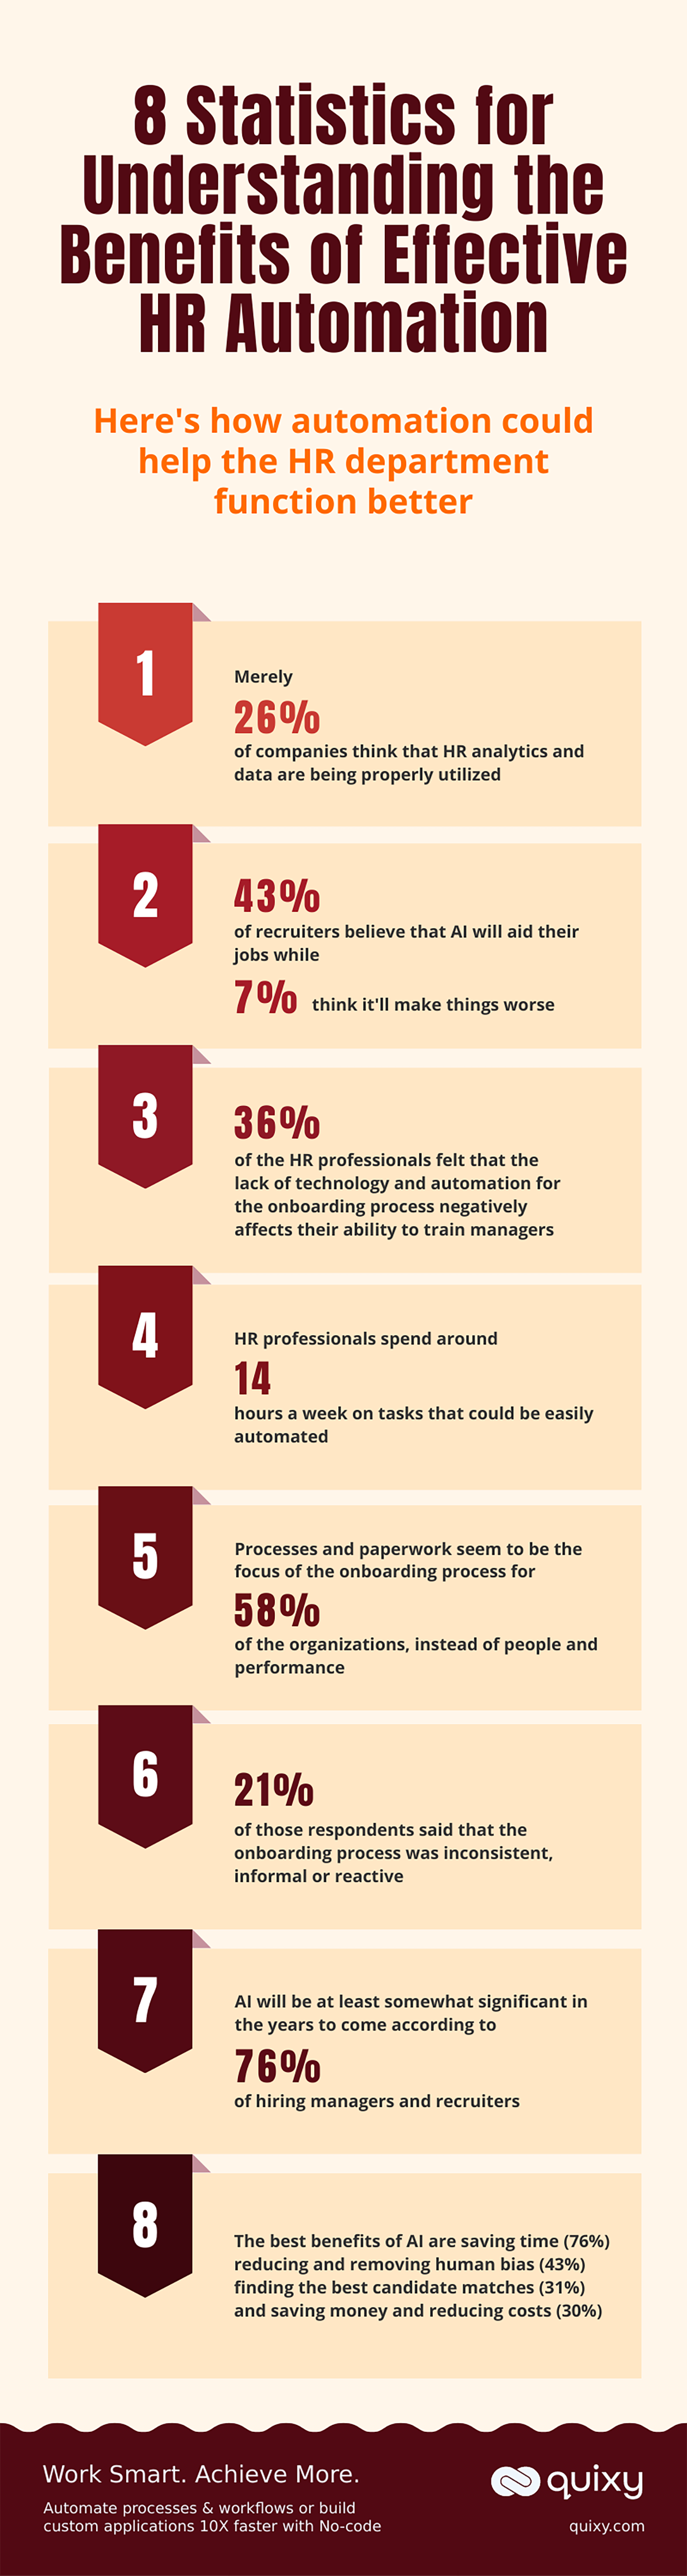 8 Statistics for Understanding the Benefits of Effective HR Automation Infographic